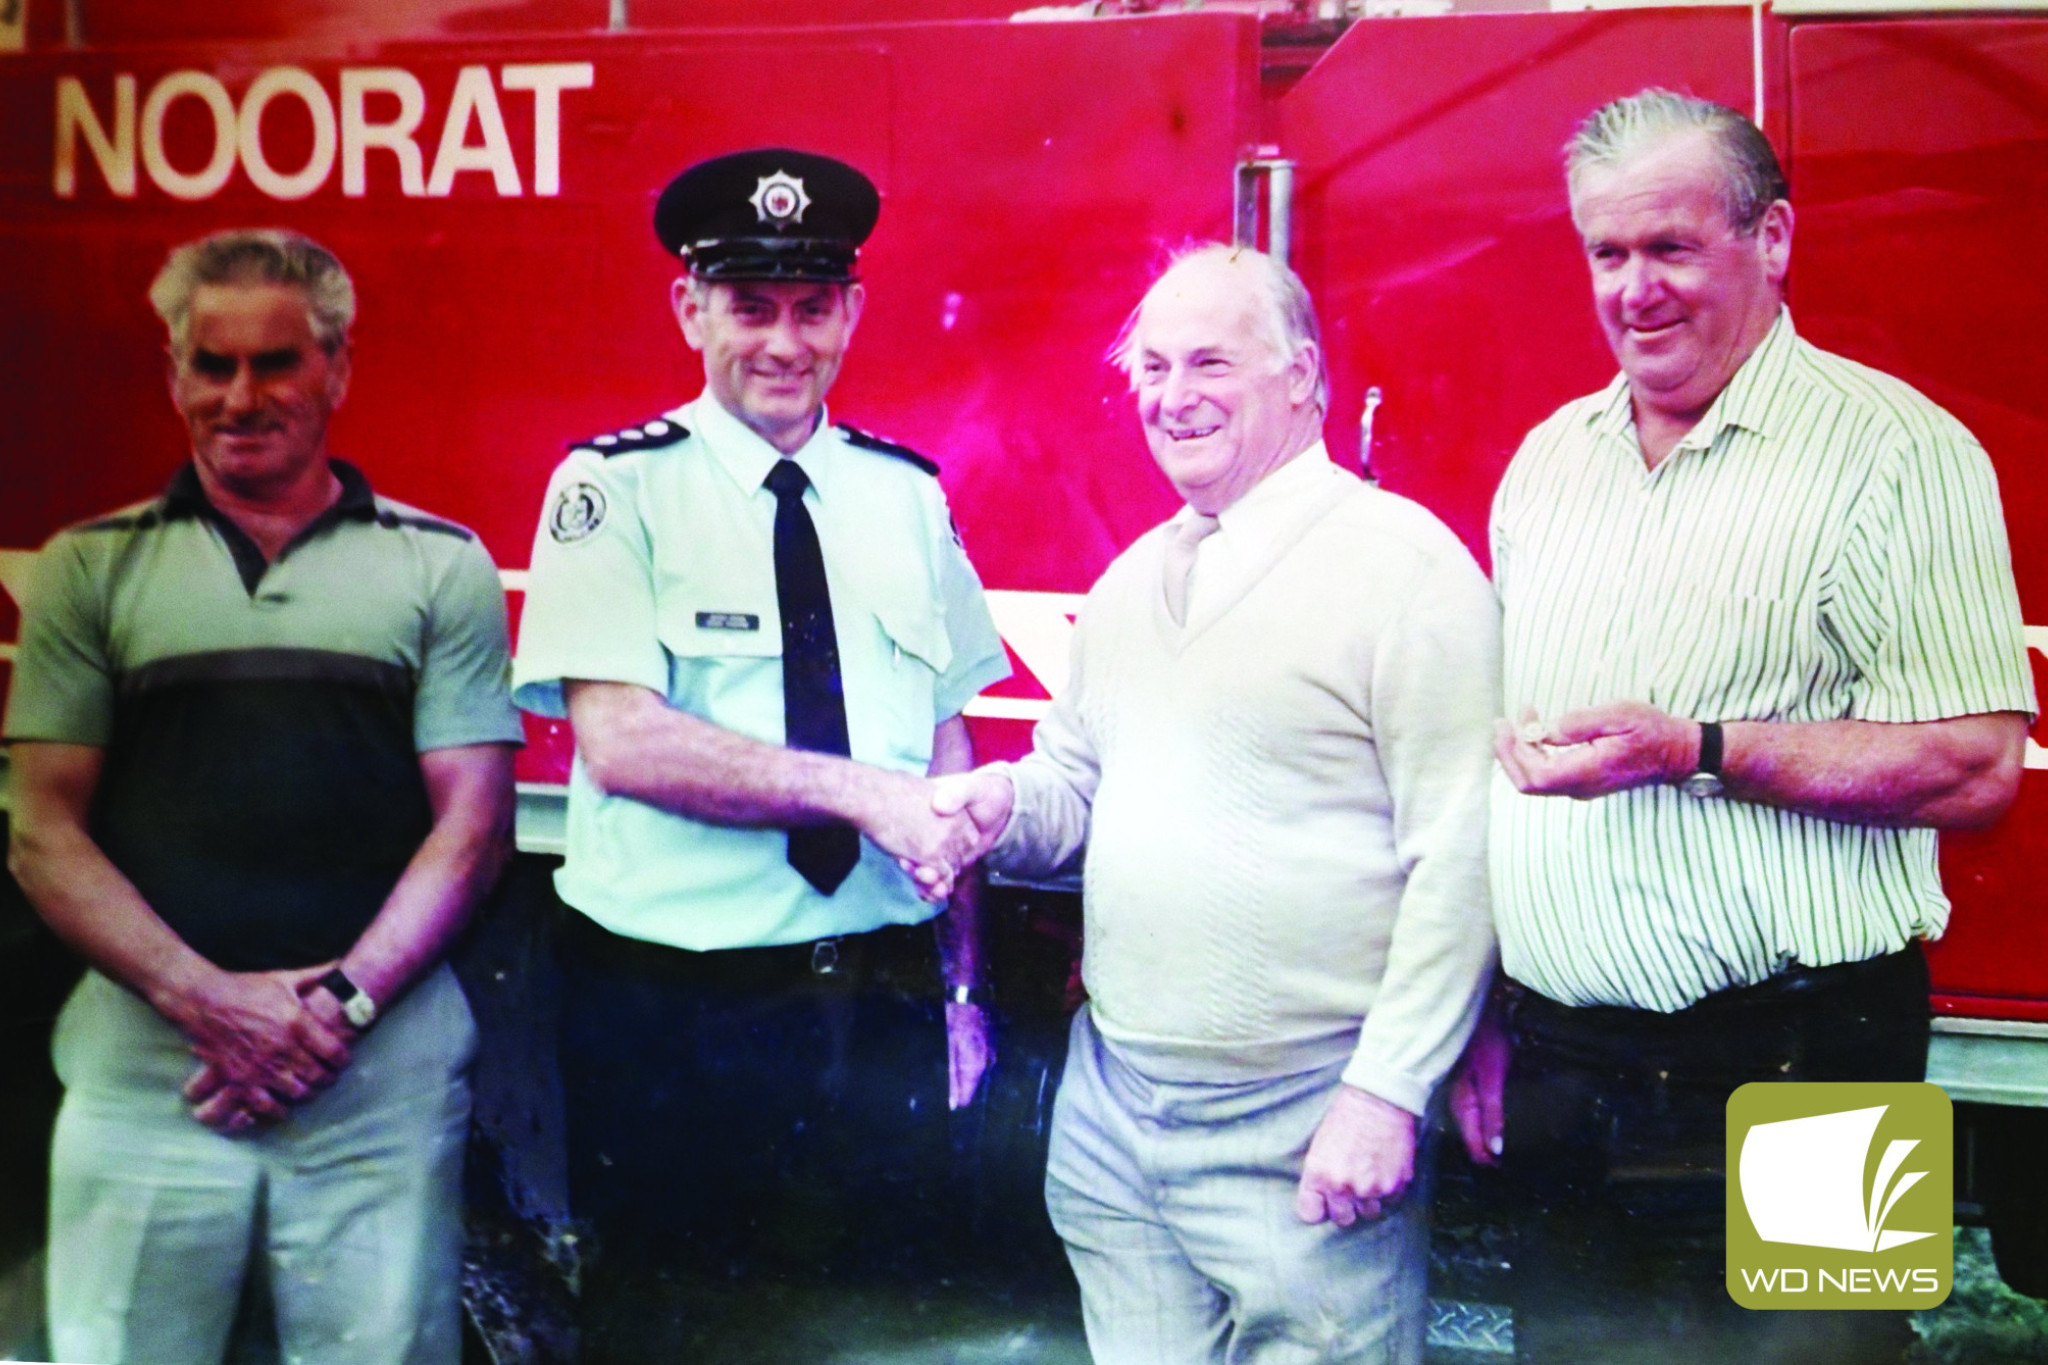 In memory: The Noorat and District CFA Brigade is mourning the loss of one of it’s longest serving members. David Lourey, pictured right at a 1993 Life Membership Award presentation, had served 65 years with the brigade.